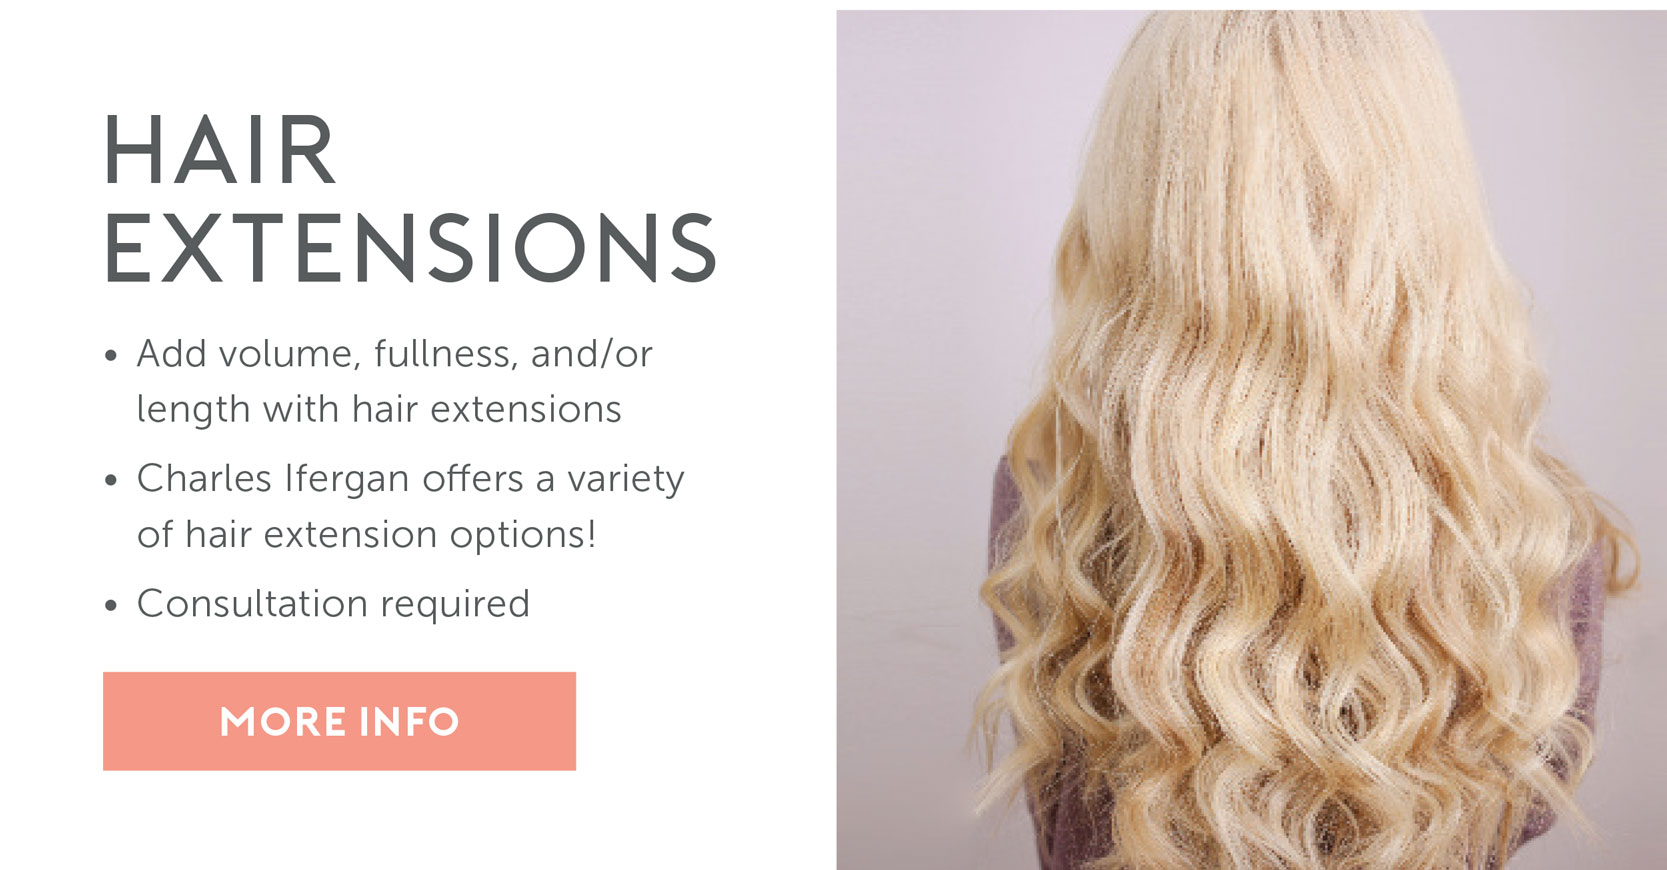 Hair Extensions – Add volume, fullness, & length | We offer a variety of options! | Consultation required